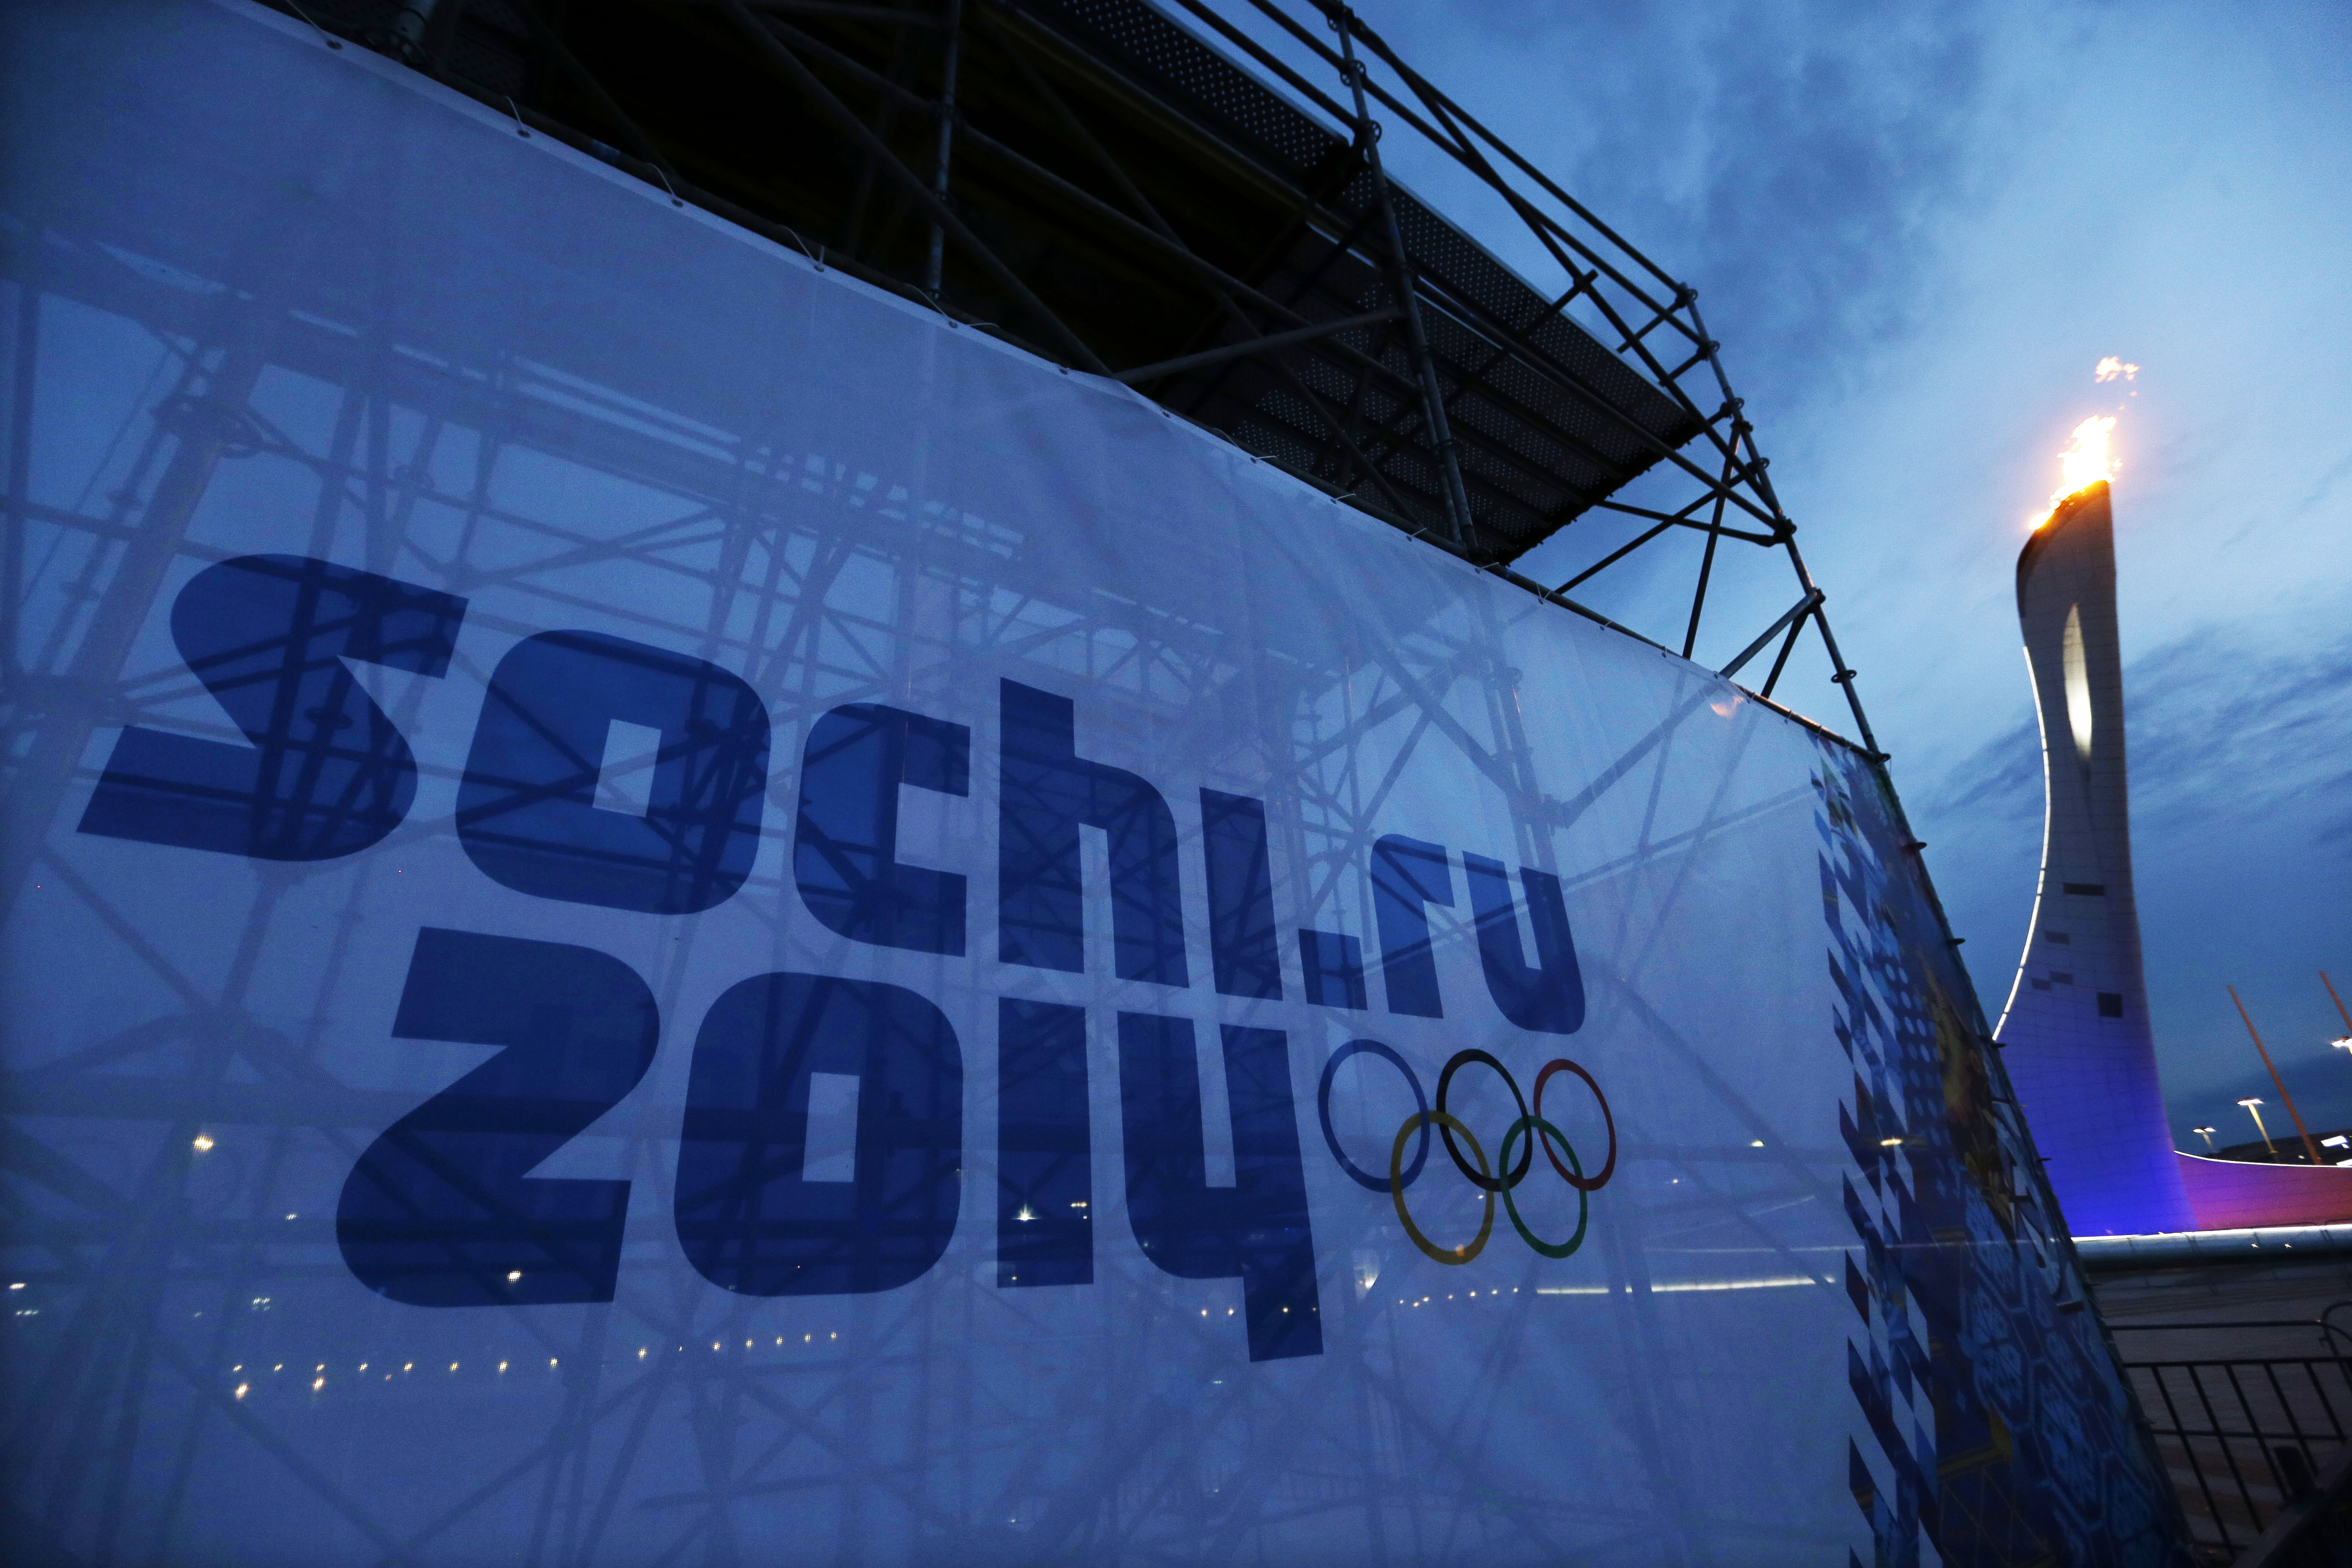 AP to draw on its Russia expertise at Sochi Olympics